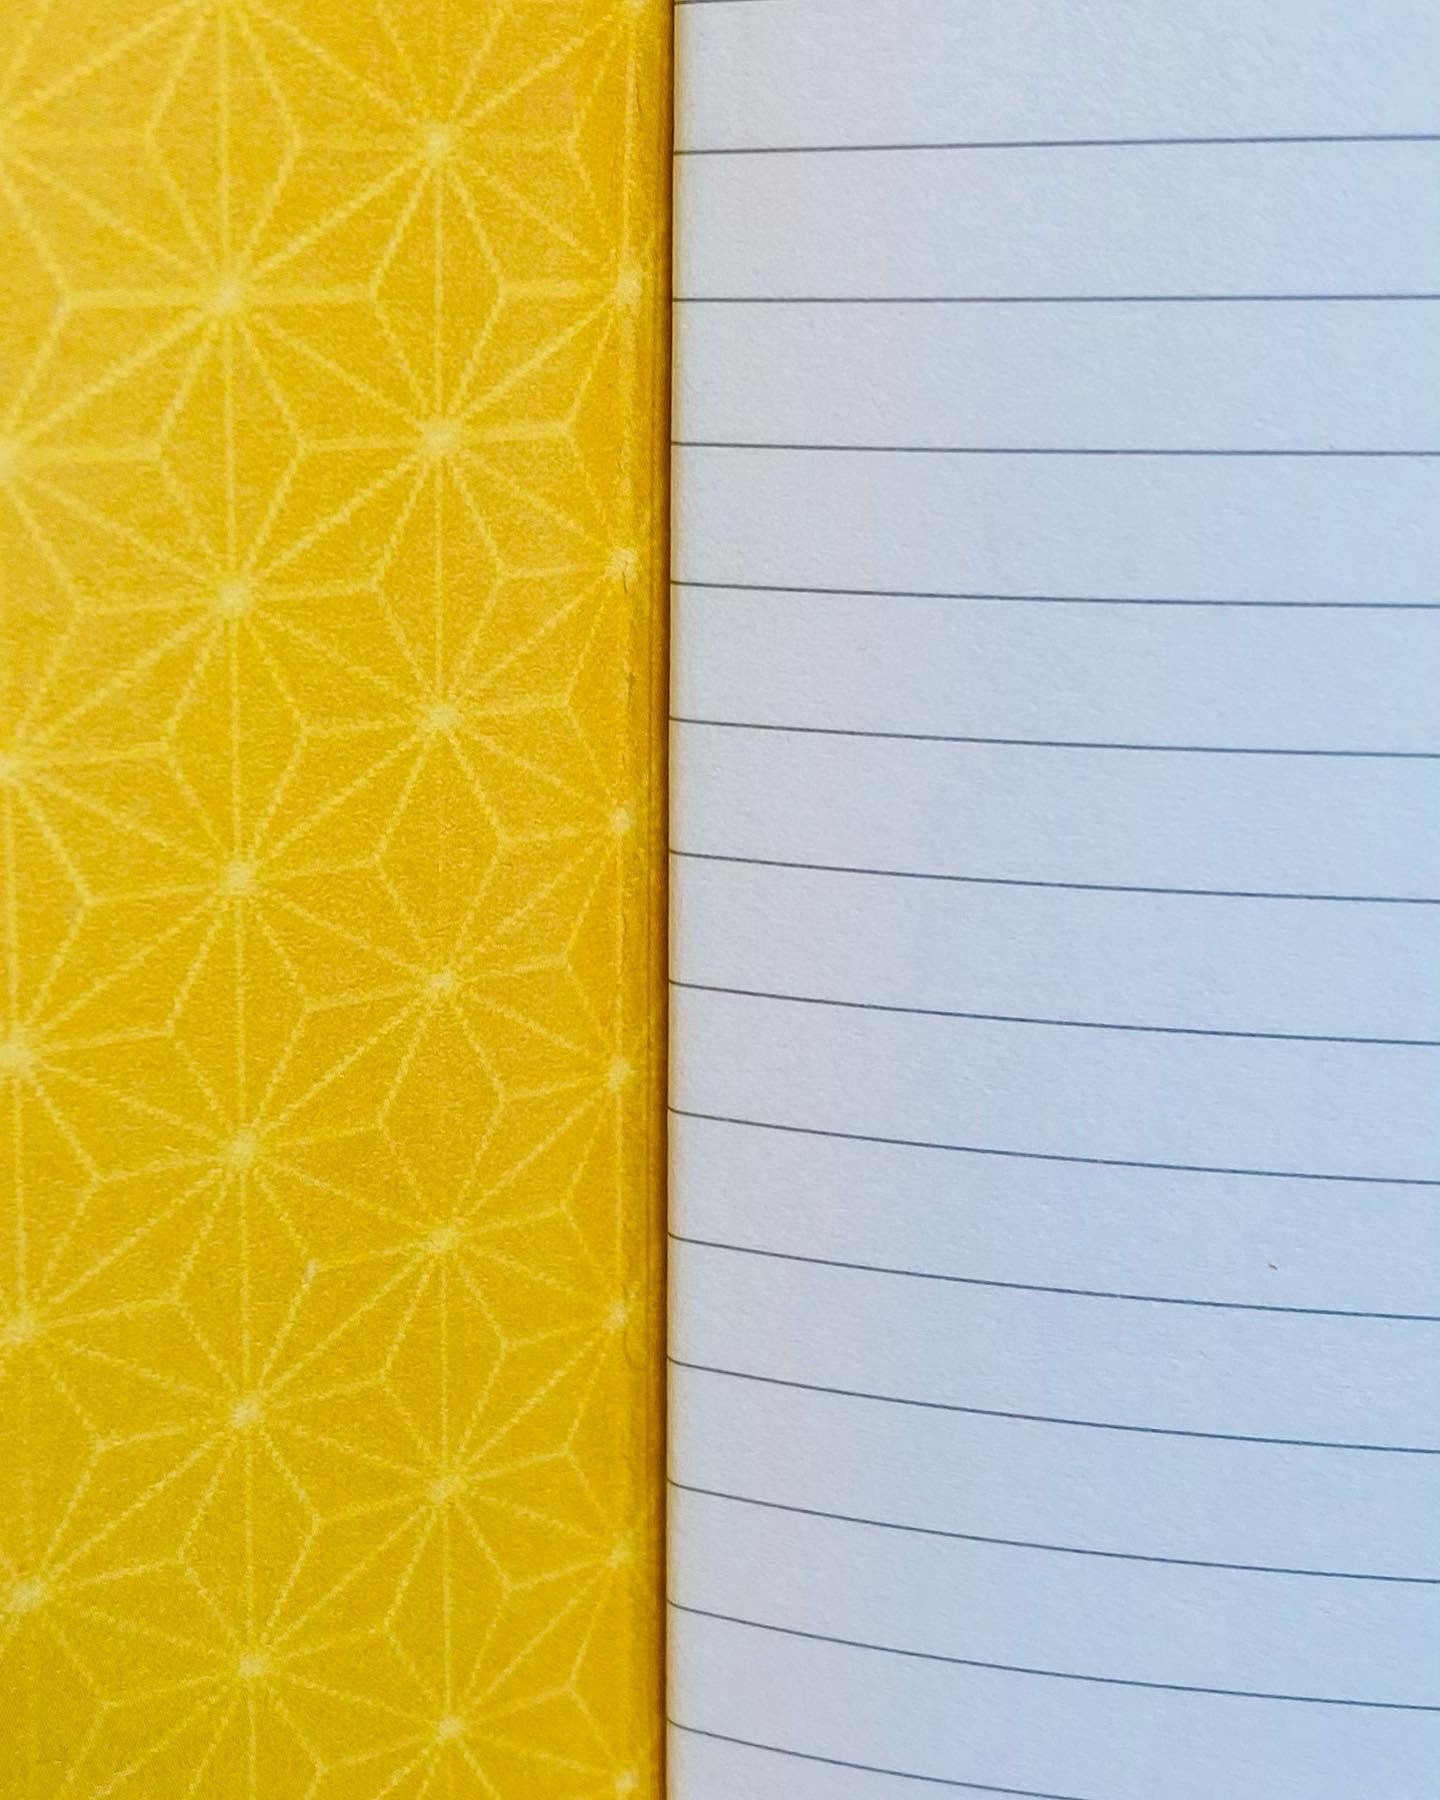 Rainbow Lined A5 Notebook (100% recycled)